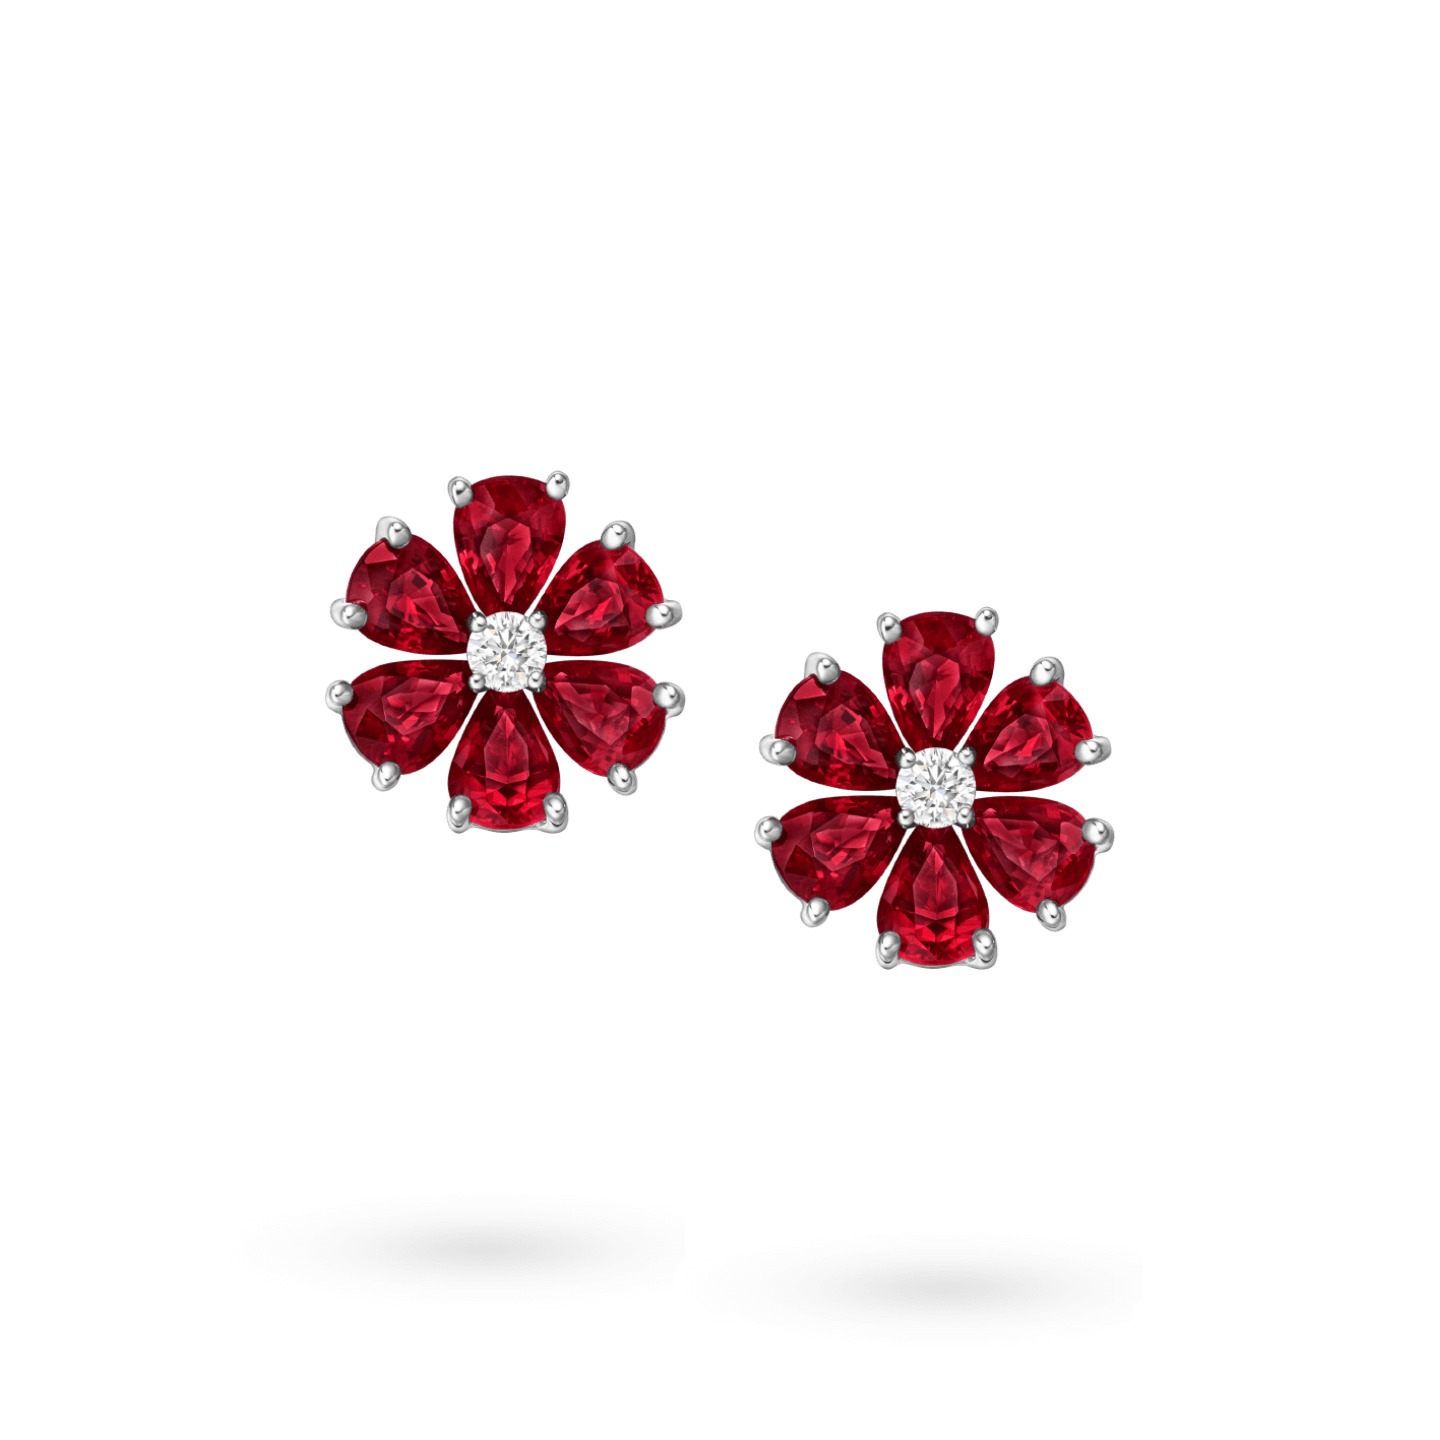 Forget-Me-Not Ruby and Diamond Earrings, Product Image 1